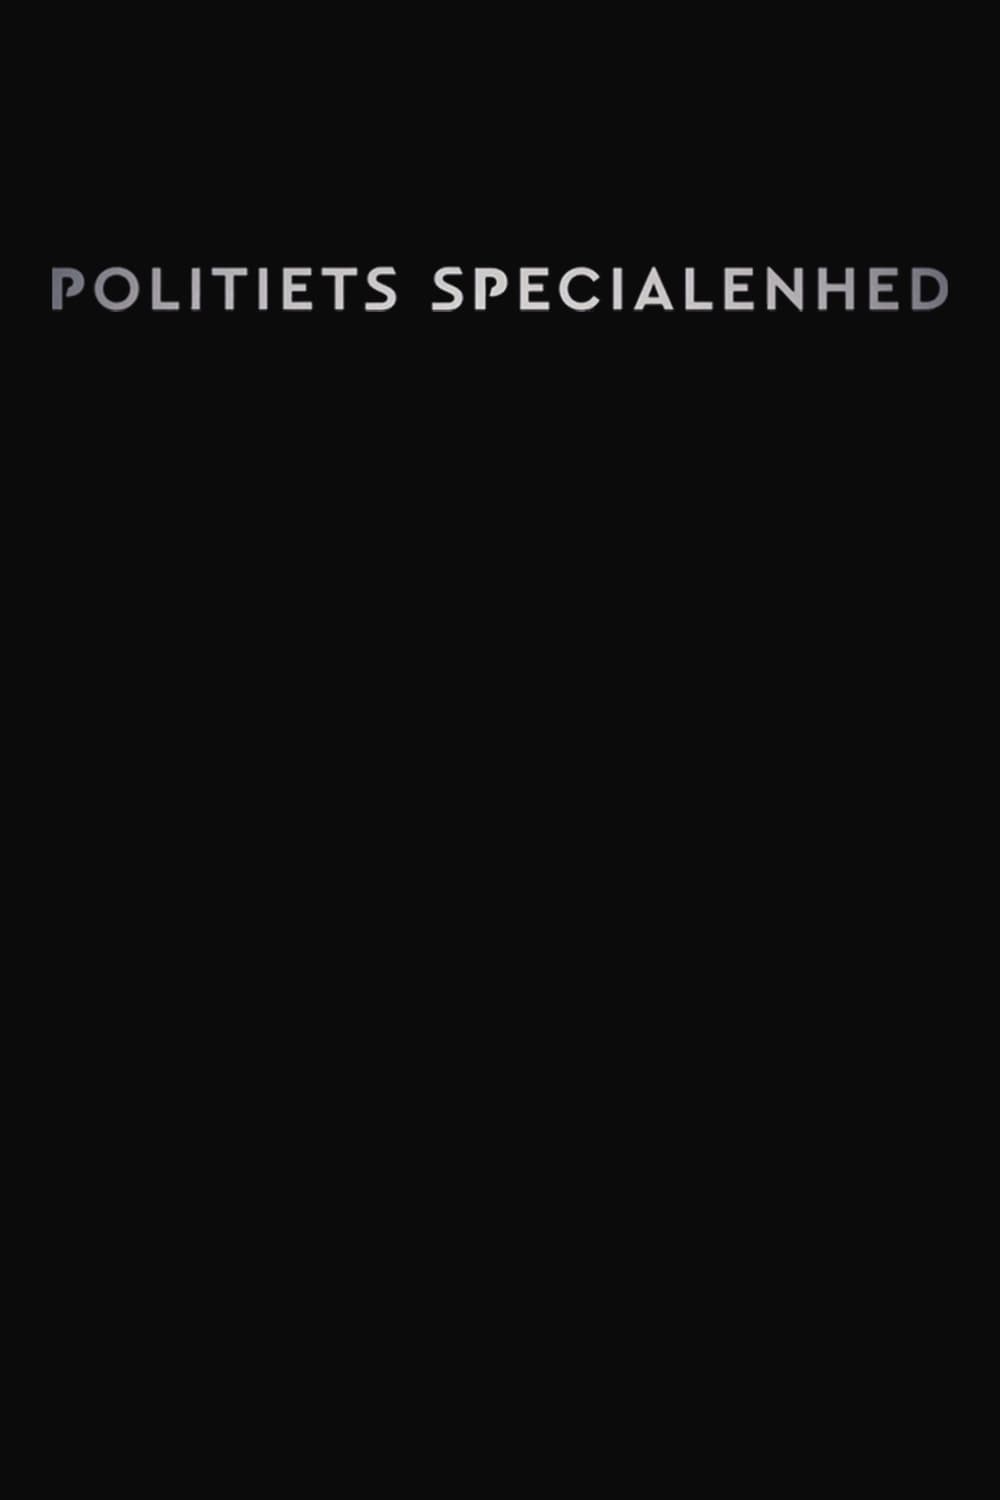 Politiets specialenhed